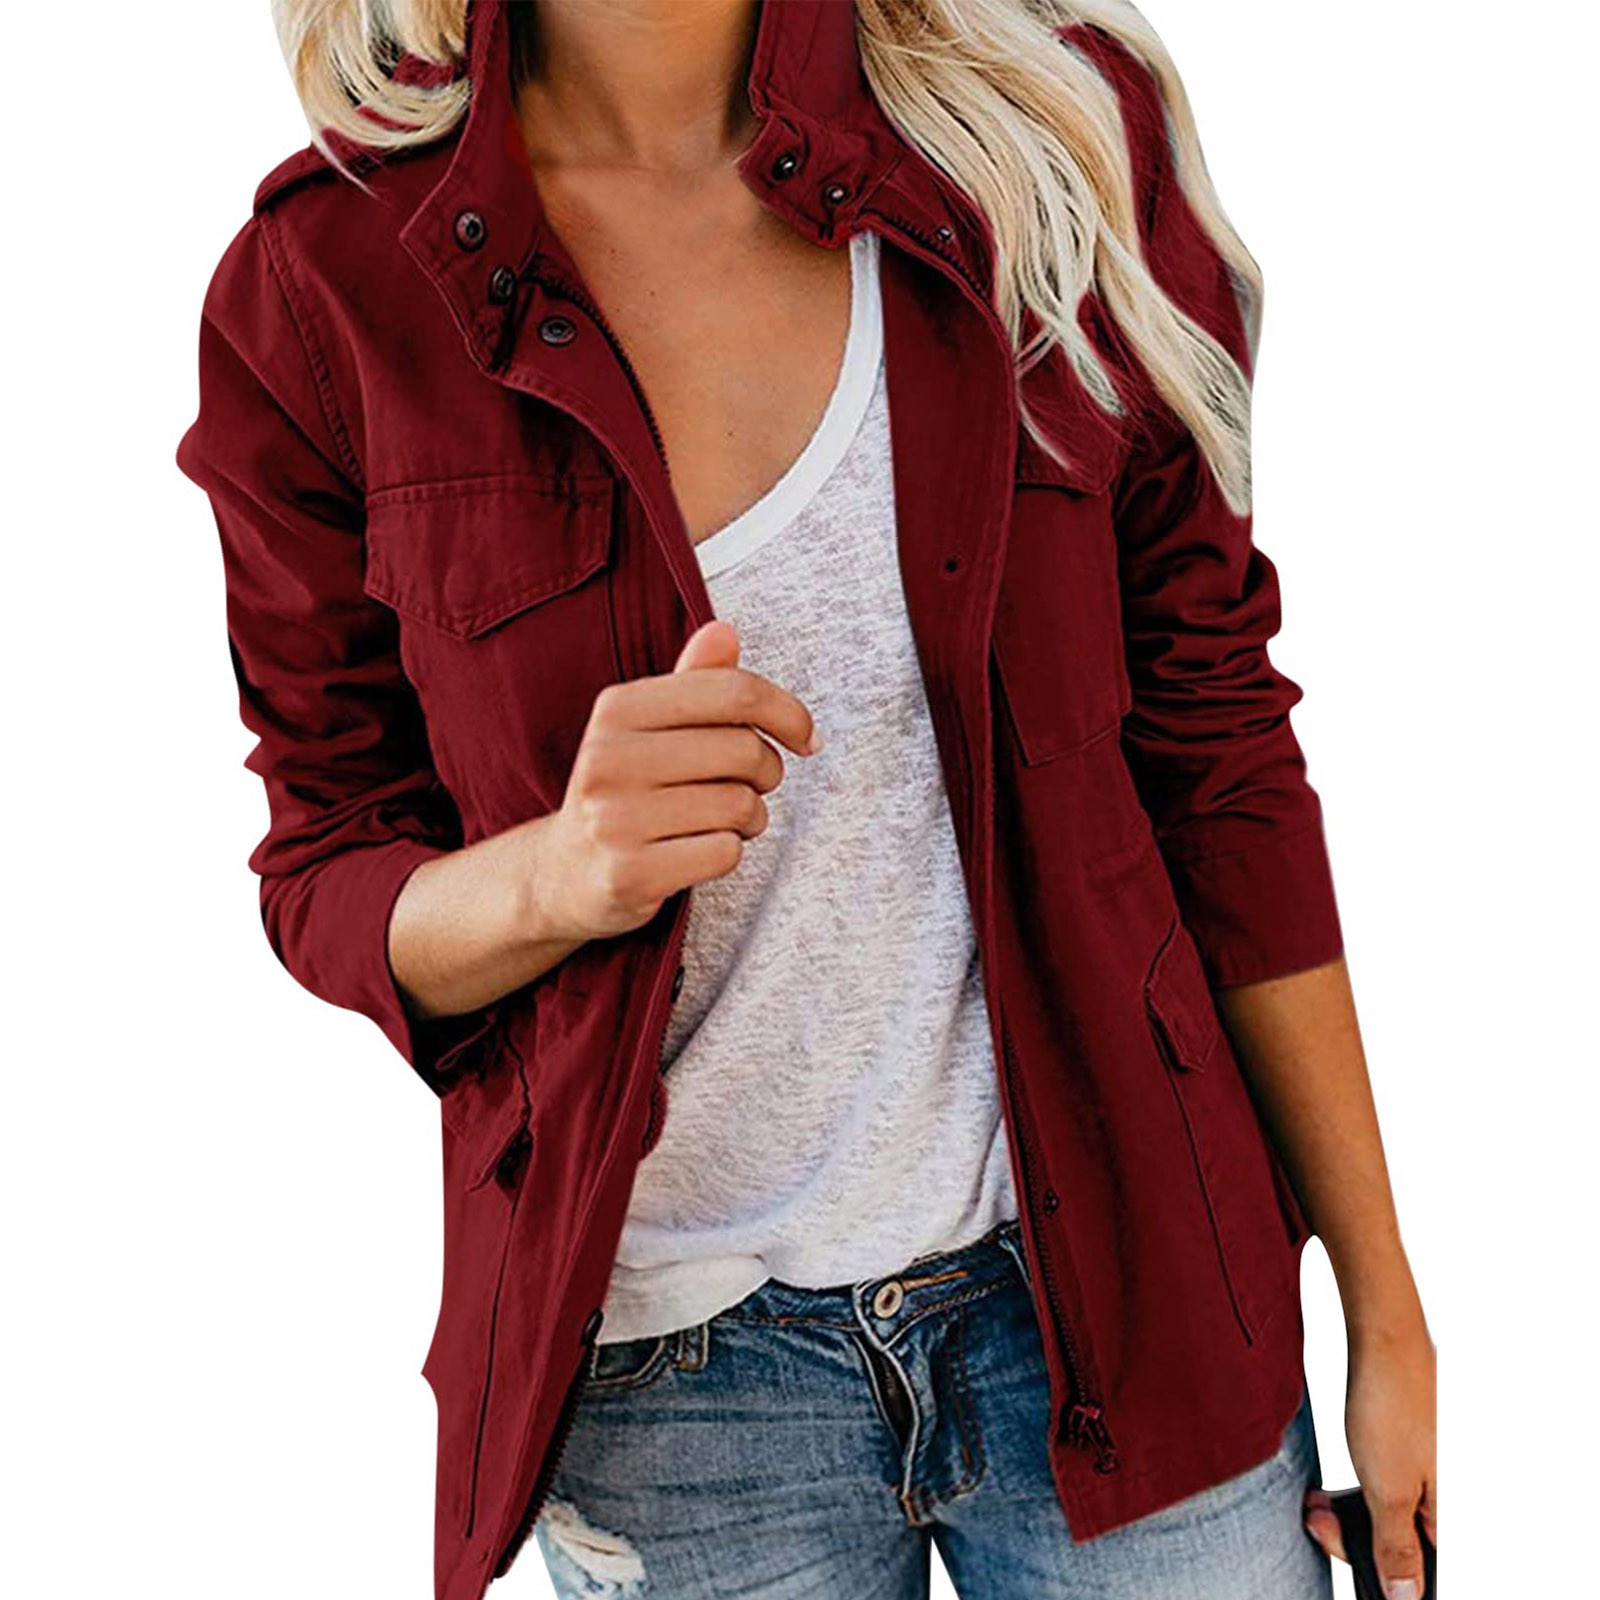 Women's Plus Size Jacket Daily Fall Regular Coat Regular Fit Breathable Casual Jacket Long Sleeve Solid Color Quilted Coat Heated Vest with Collar Dressy Womens Coats Winter Tennis Jacket Women Women - image 1 of 7